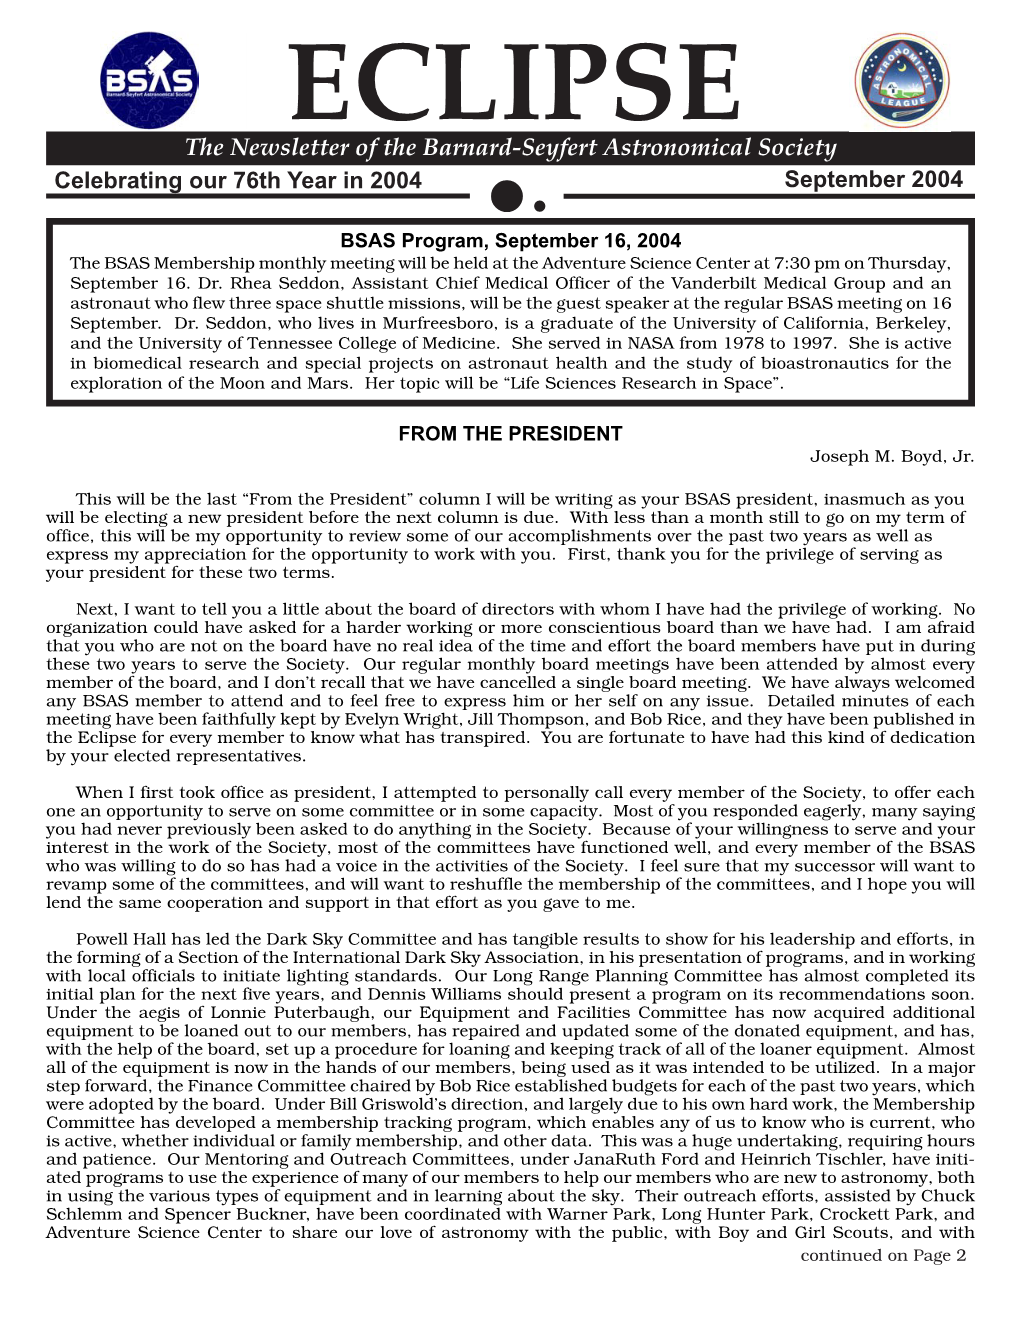 ECLIPSE the Newsletter of the Barnard-Seyfert Astronomical Society Celebrating Our 76Th Year in 2004 September 2004